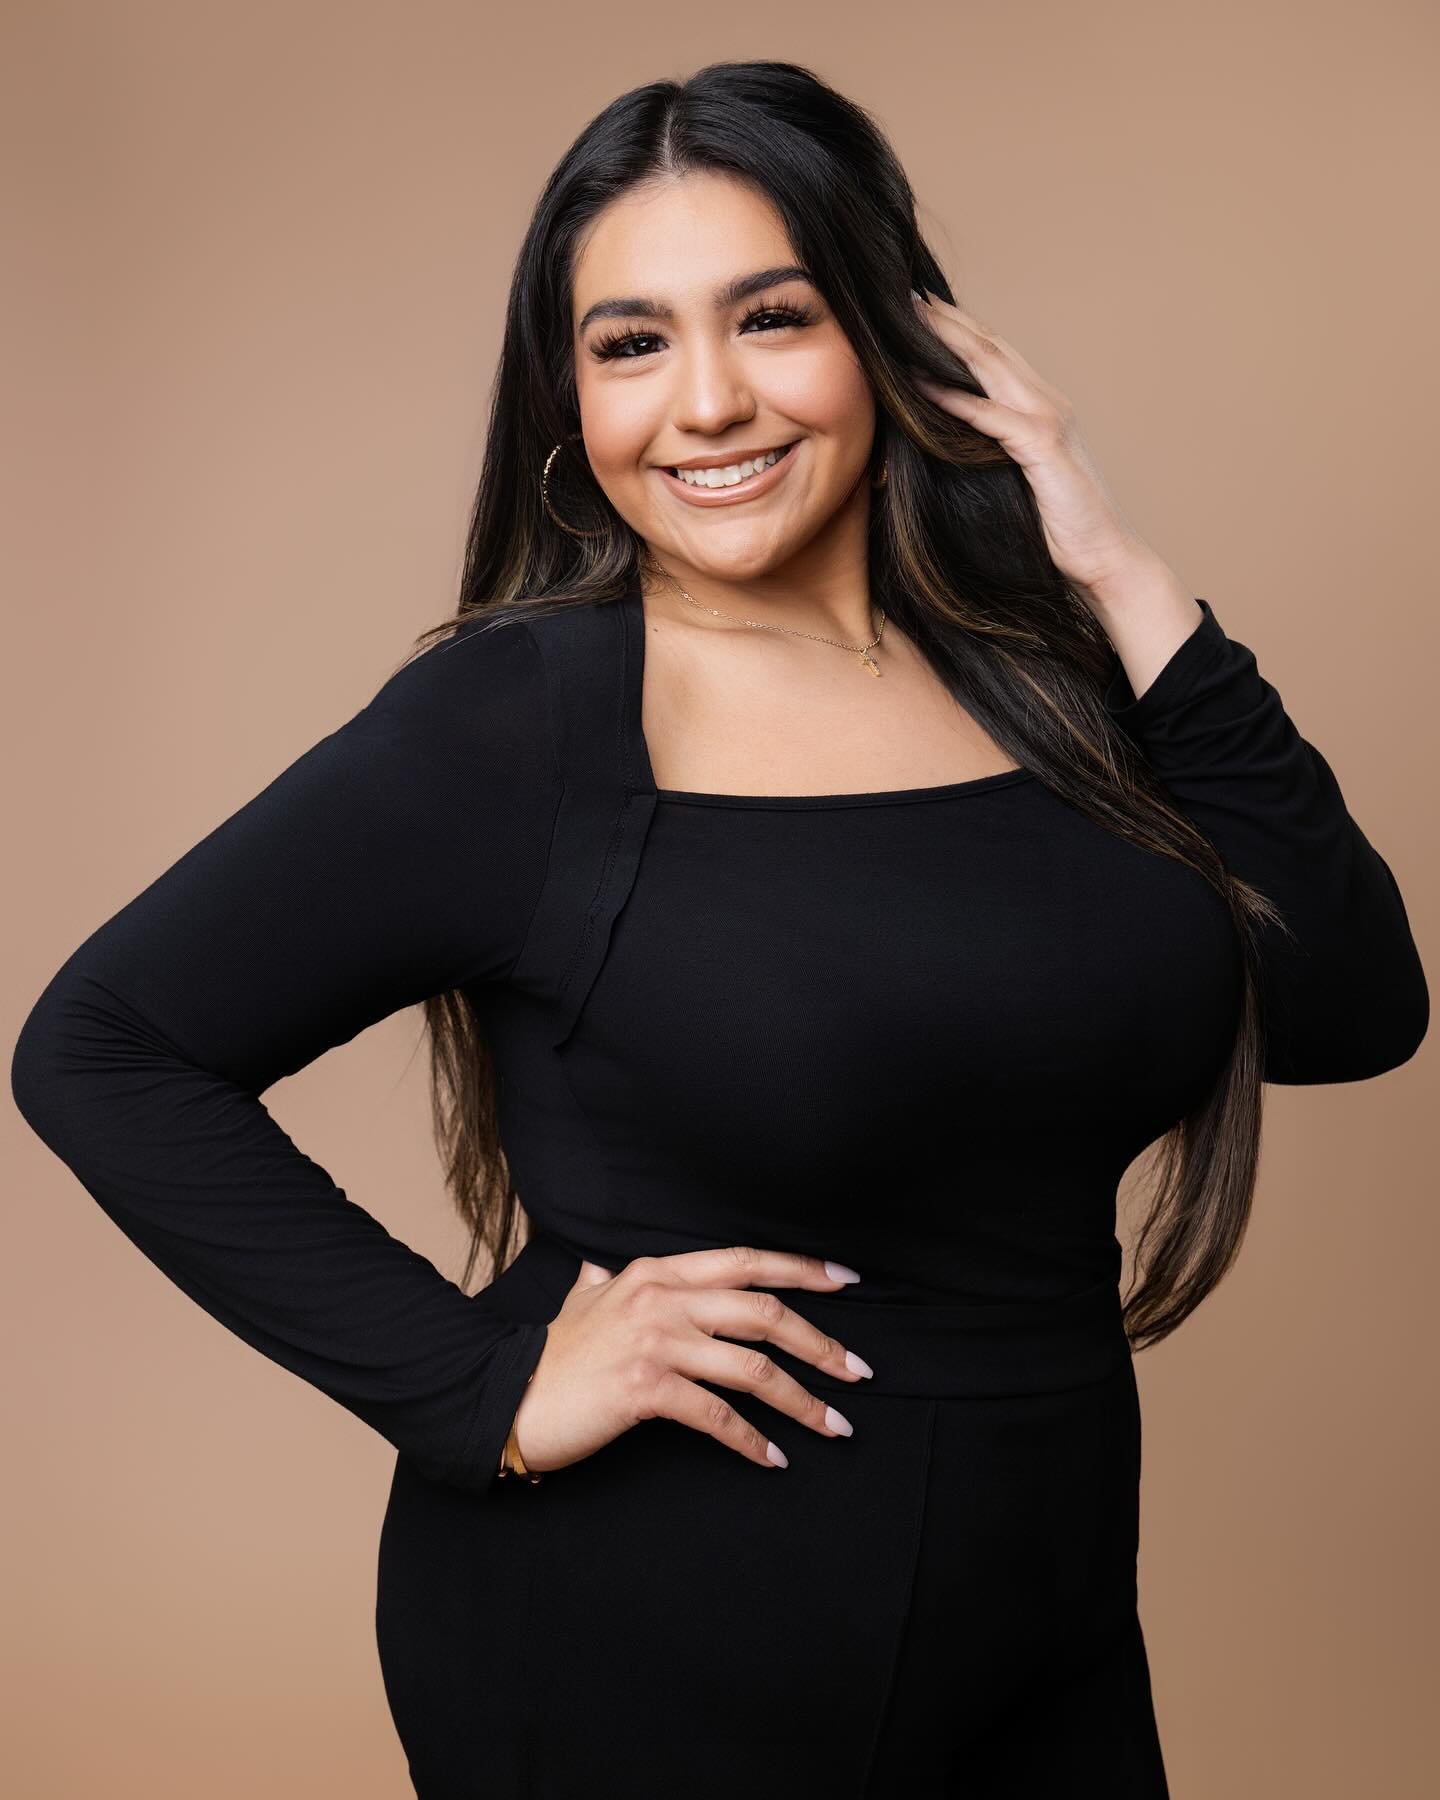 MEET OUR NEWEST TEAM MEMBER😍😍😍😍 

&iexcl;Hola! ❤️❤️ I&rsquo;m Julie Henriquez, an aspiring makeup artist fueled by my deep passion for the beauty industry. My mission is to empower women to embrace their unique beauty and confidence, just as God 